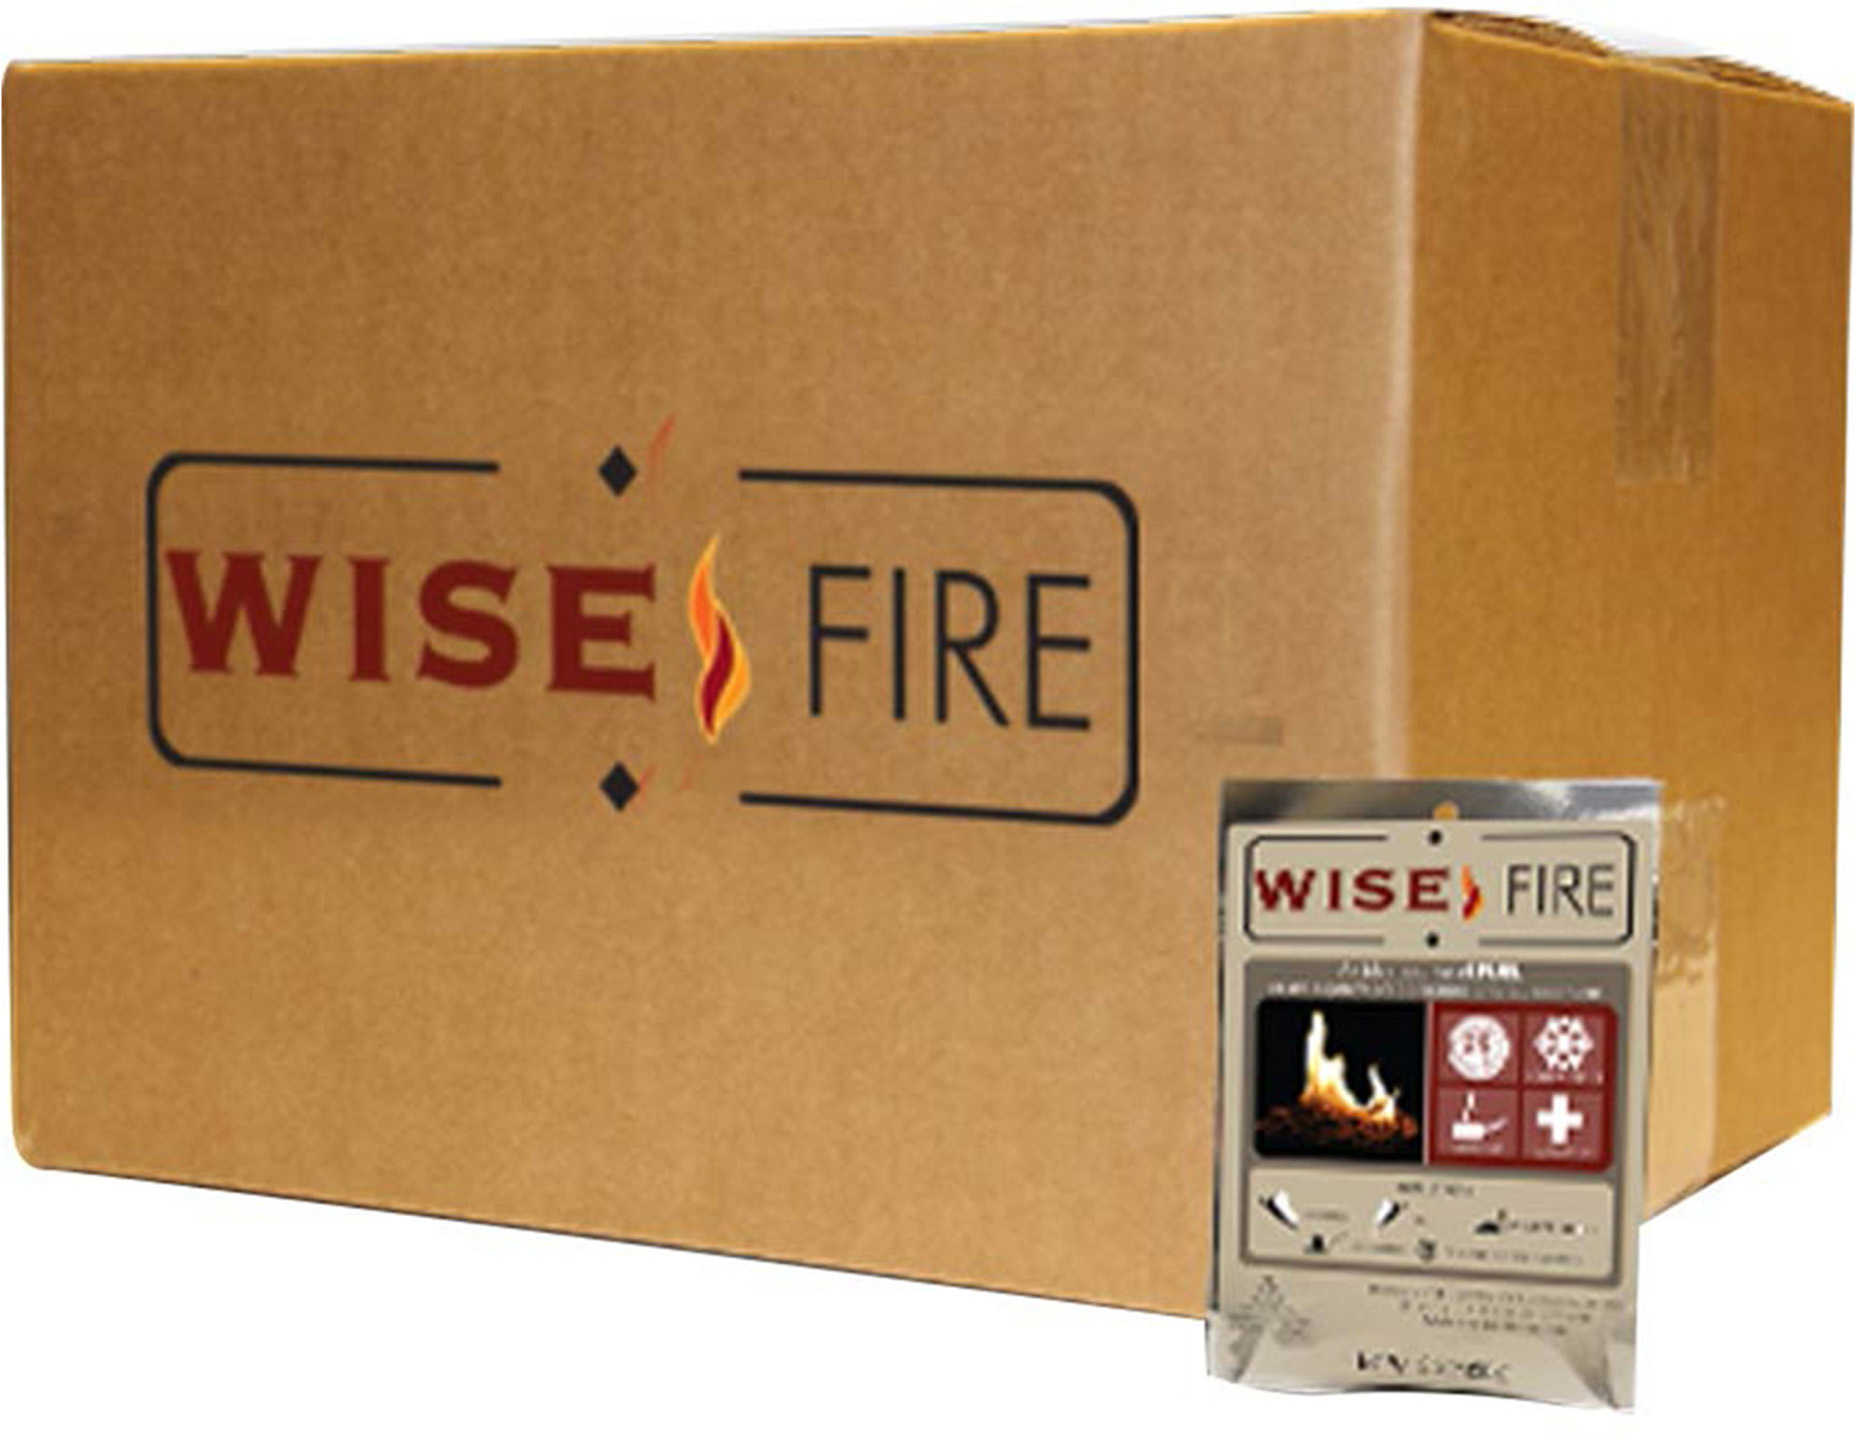 Wise WISEFIRE 15 Pouch Case Boils 60 Cups Of Water